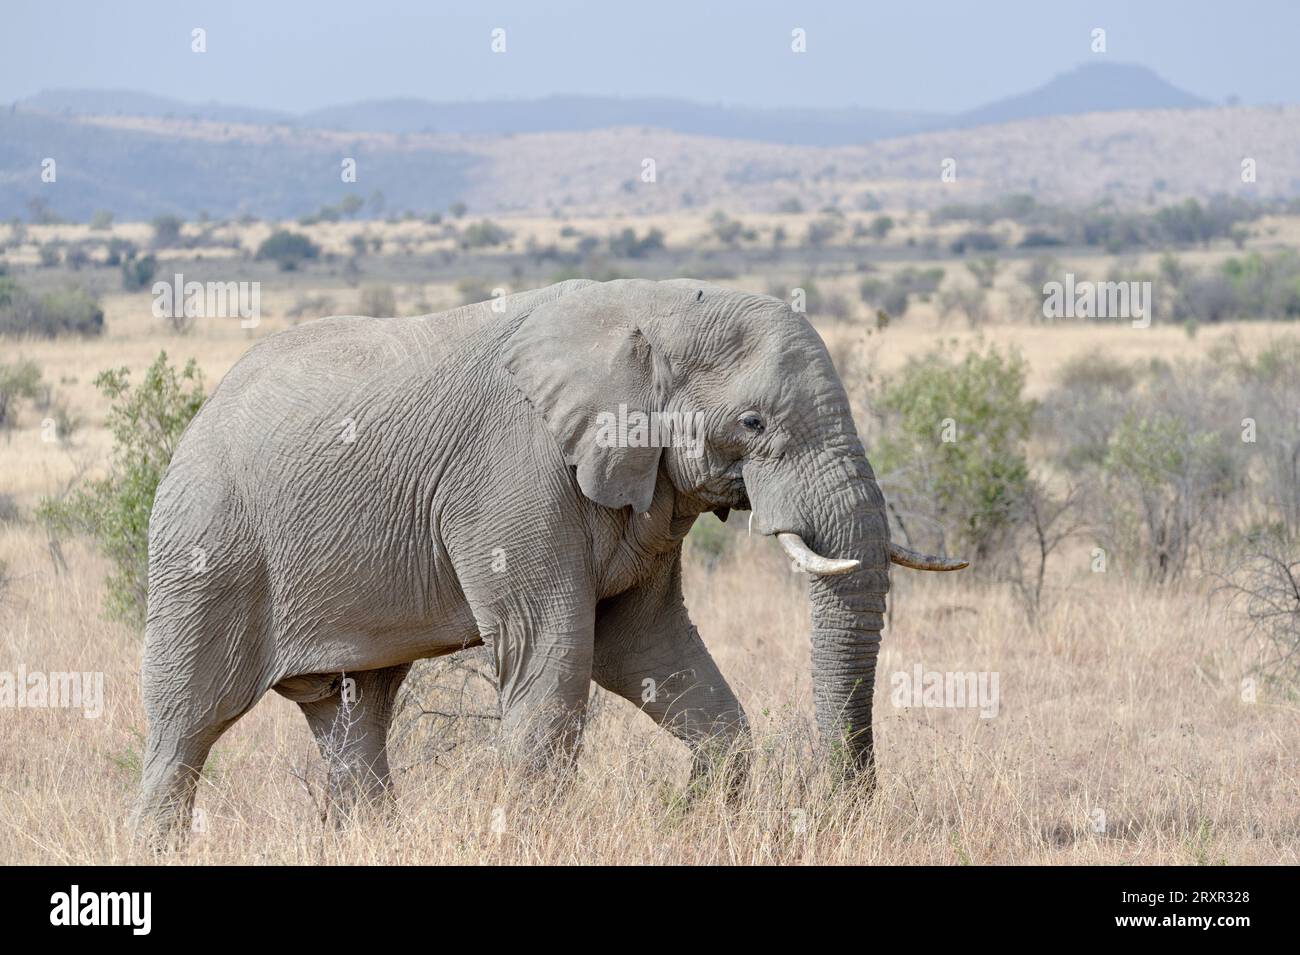 Wild elephant in Pilanesberg National Park in South Africa. Stock Photo